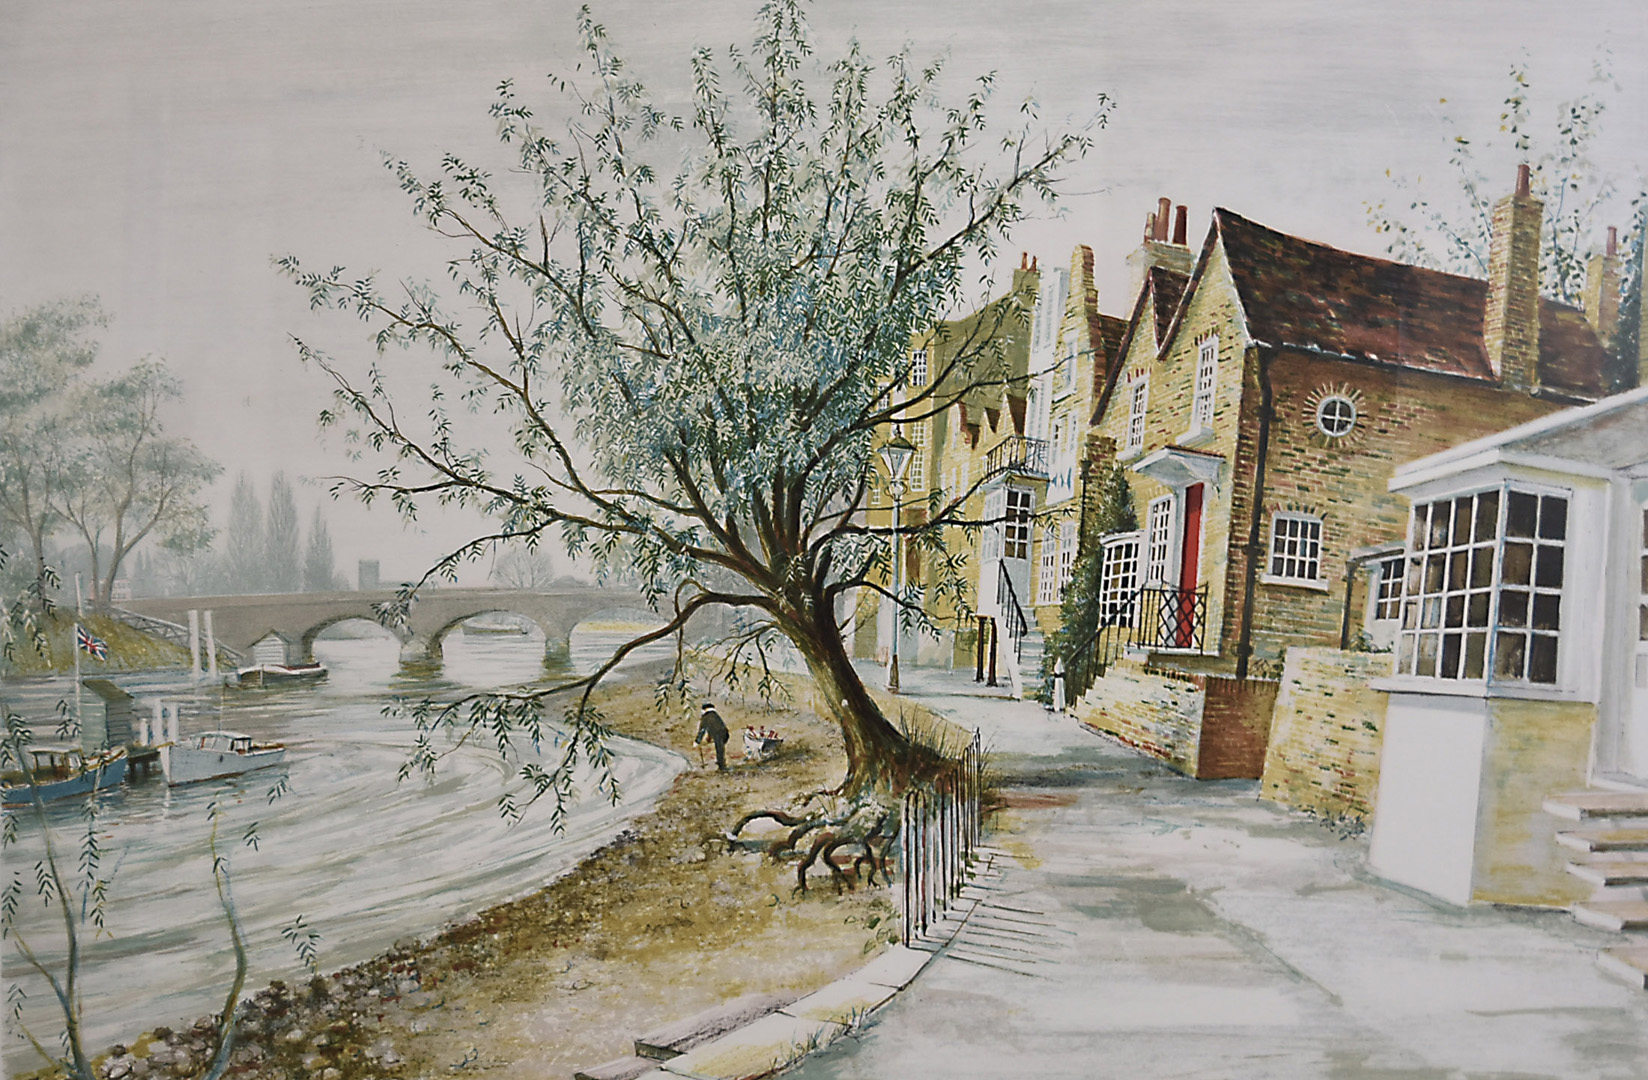 Jeremy King limited edition signed print, The Strand Green, signed to margin and numbered 86/250, 43